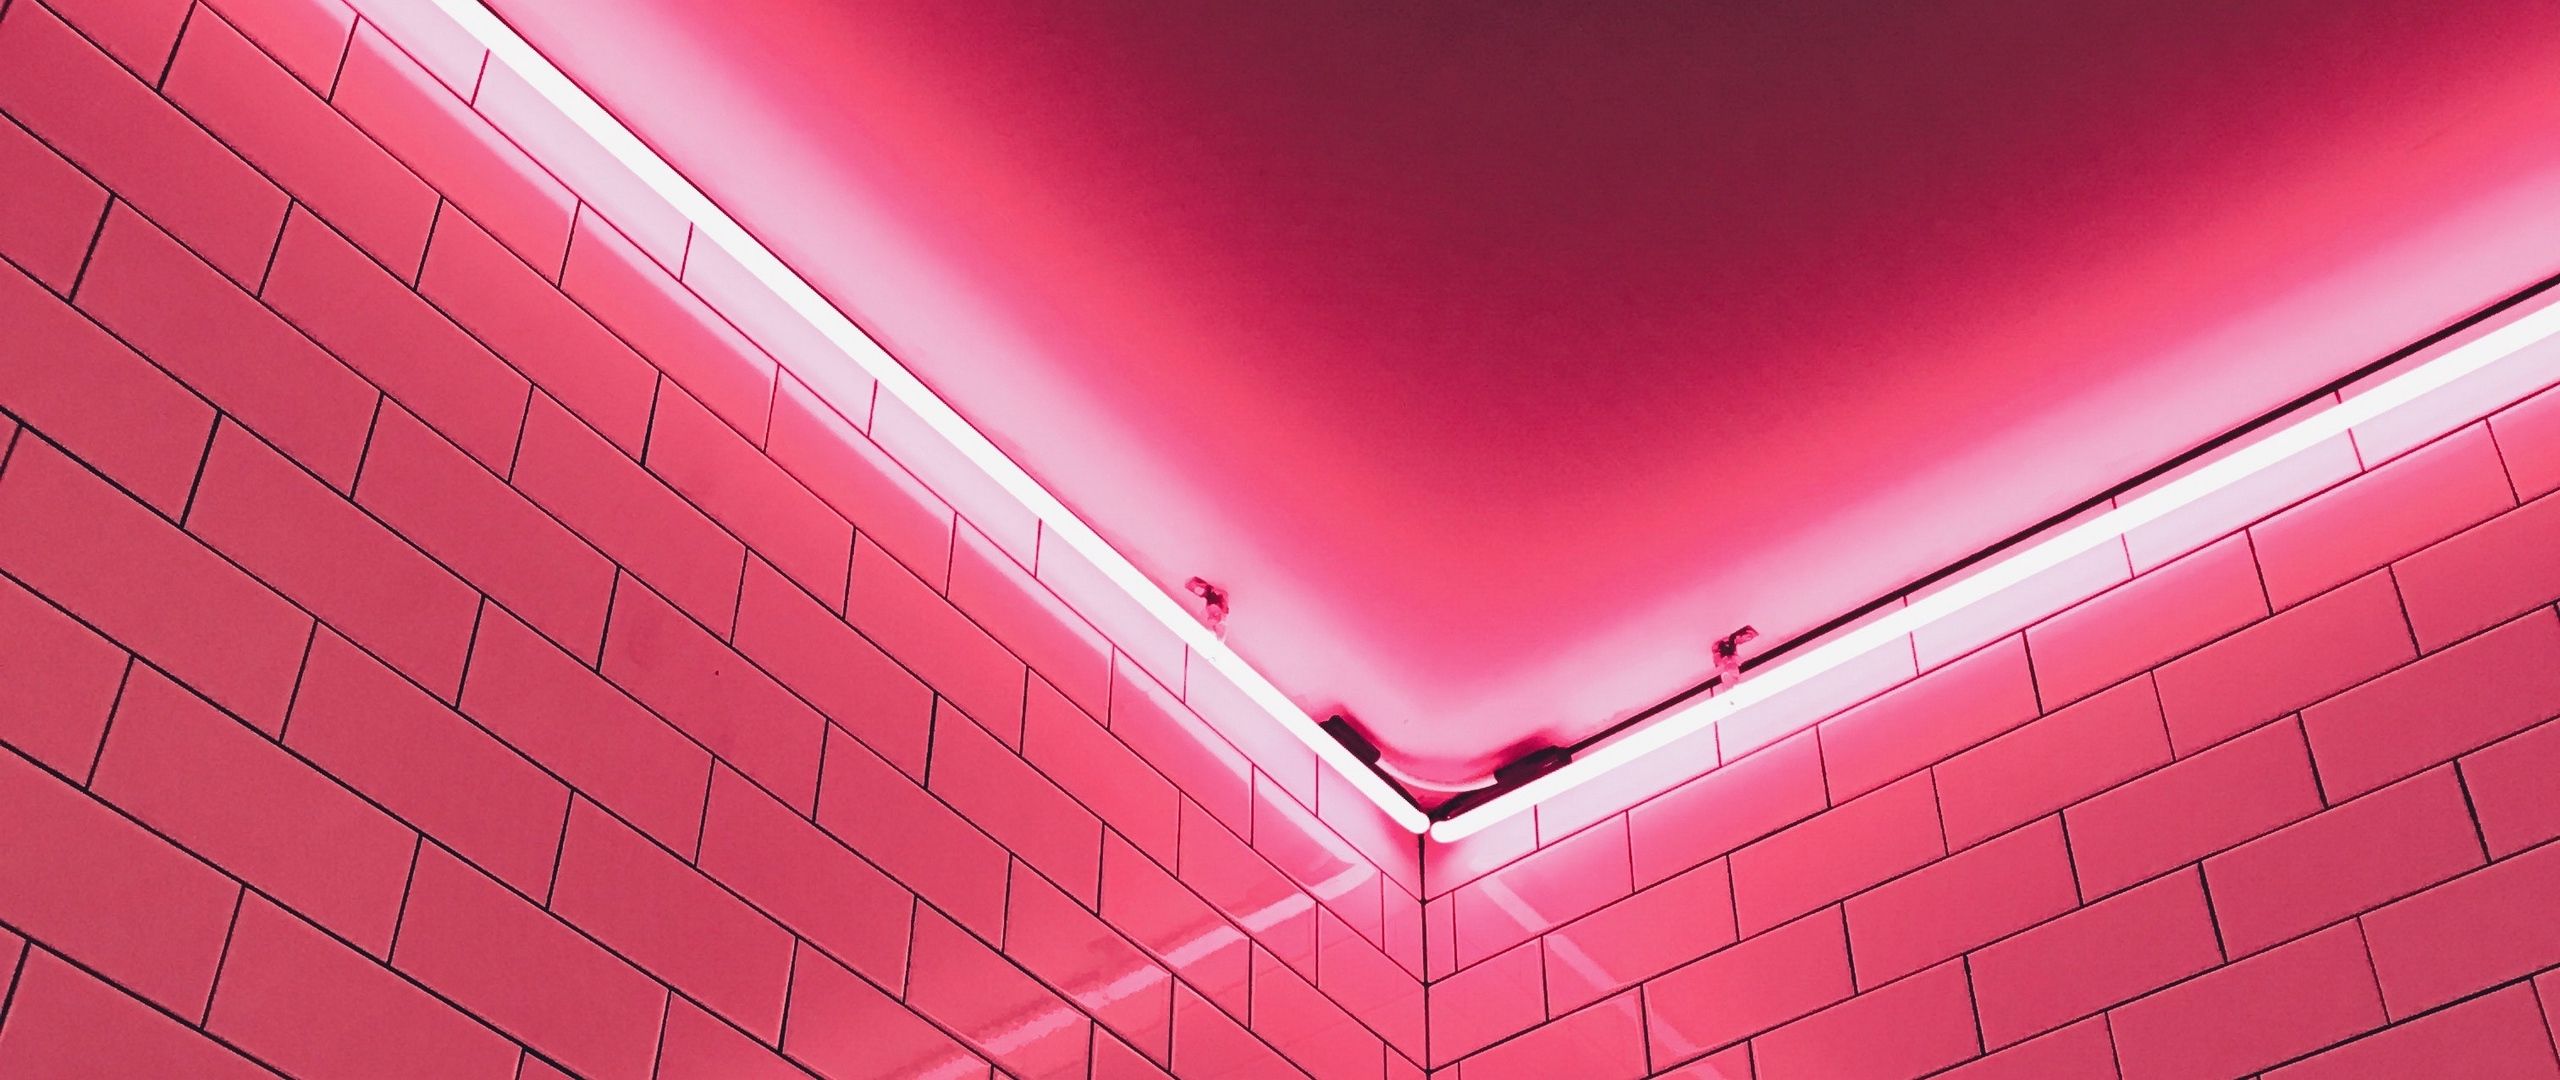 Download wallpaper 2560x1080 wall, light, pink, tile dual wide